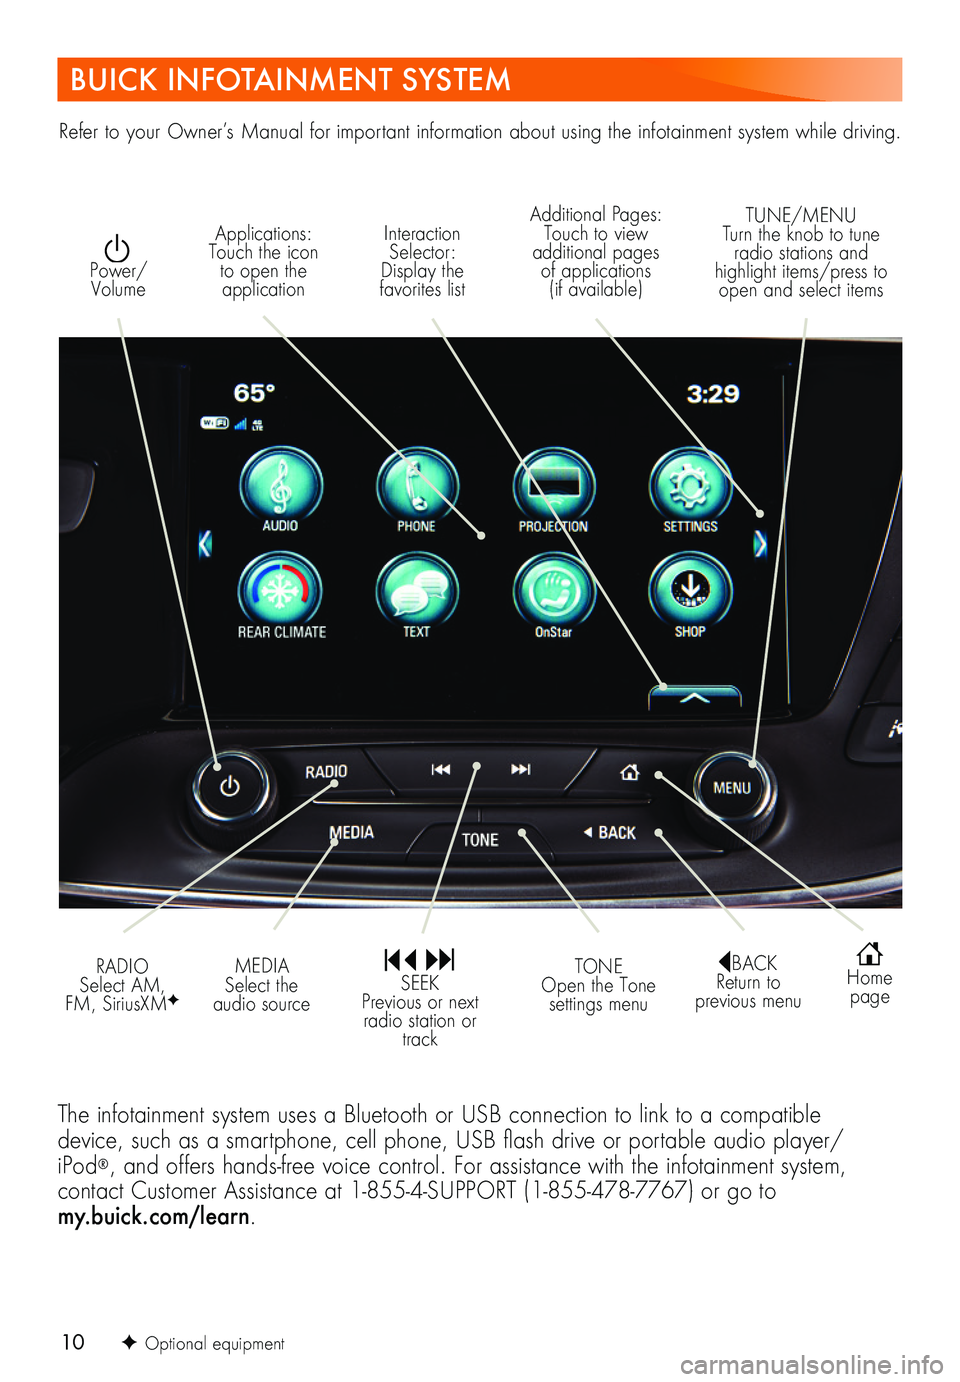 BUICK BENVISION 2018  Get To Know Guide 10
BUICK INFOTAINMENT SYSTEM
Interaction Selector:  Display the favorites list
TUNE/MENU Turn the knob to tune radio stations and highlight items/press to open and select items
Applications: Touch the